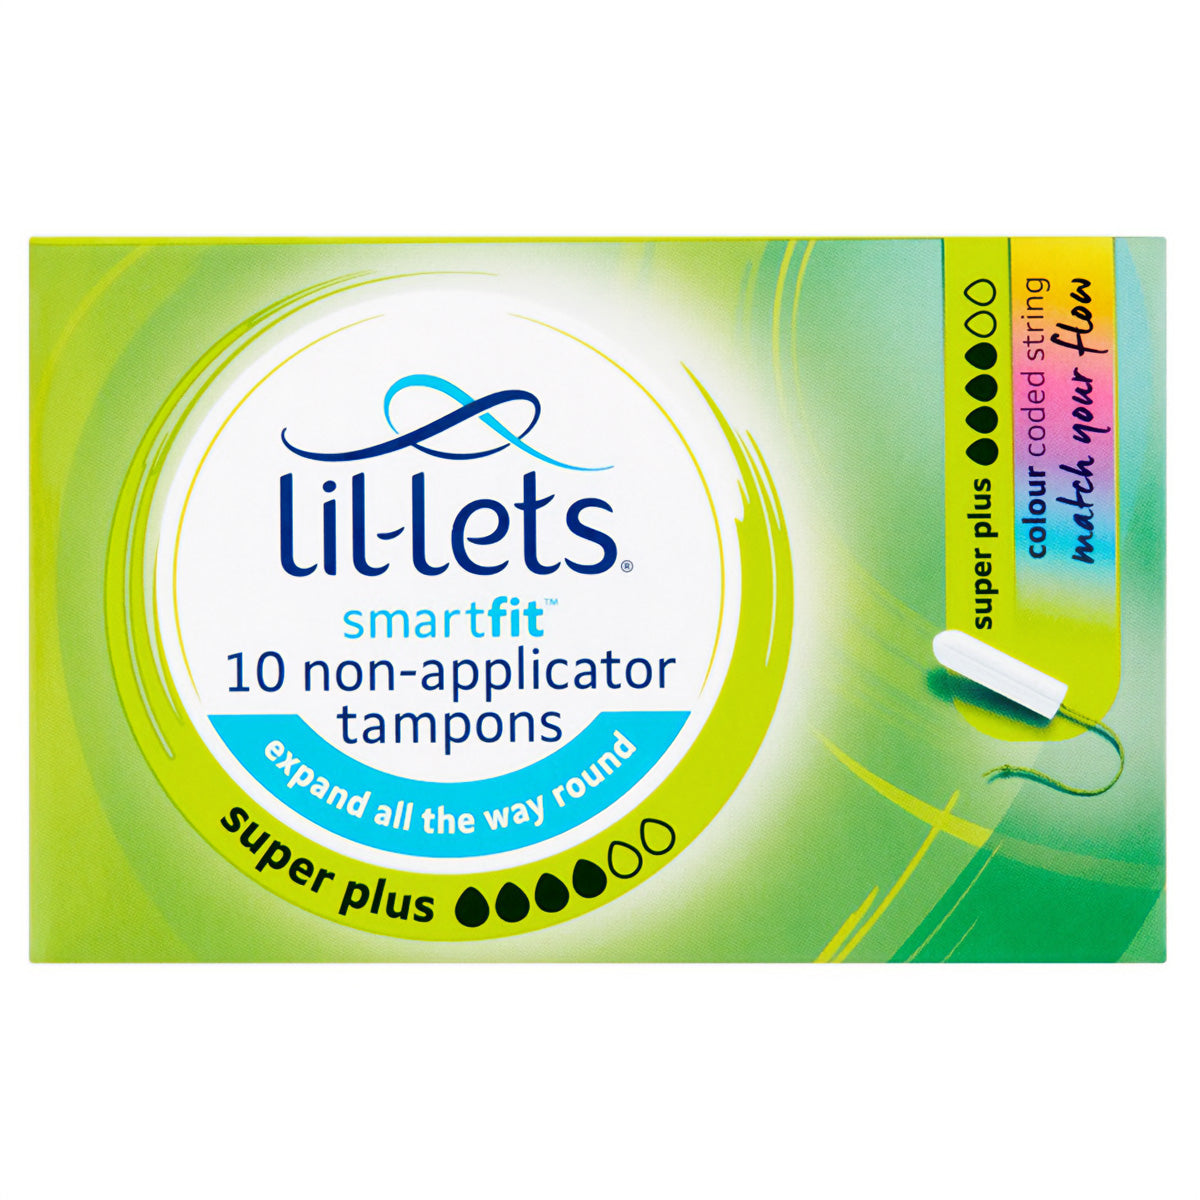 A package of Lil-Lets Non-Applicator Super Plus Tampons - 10 Pack tampons.